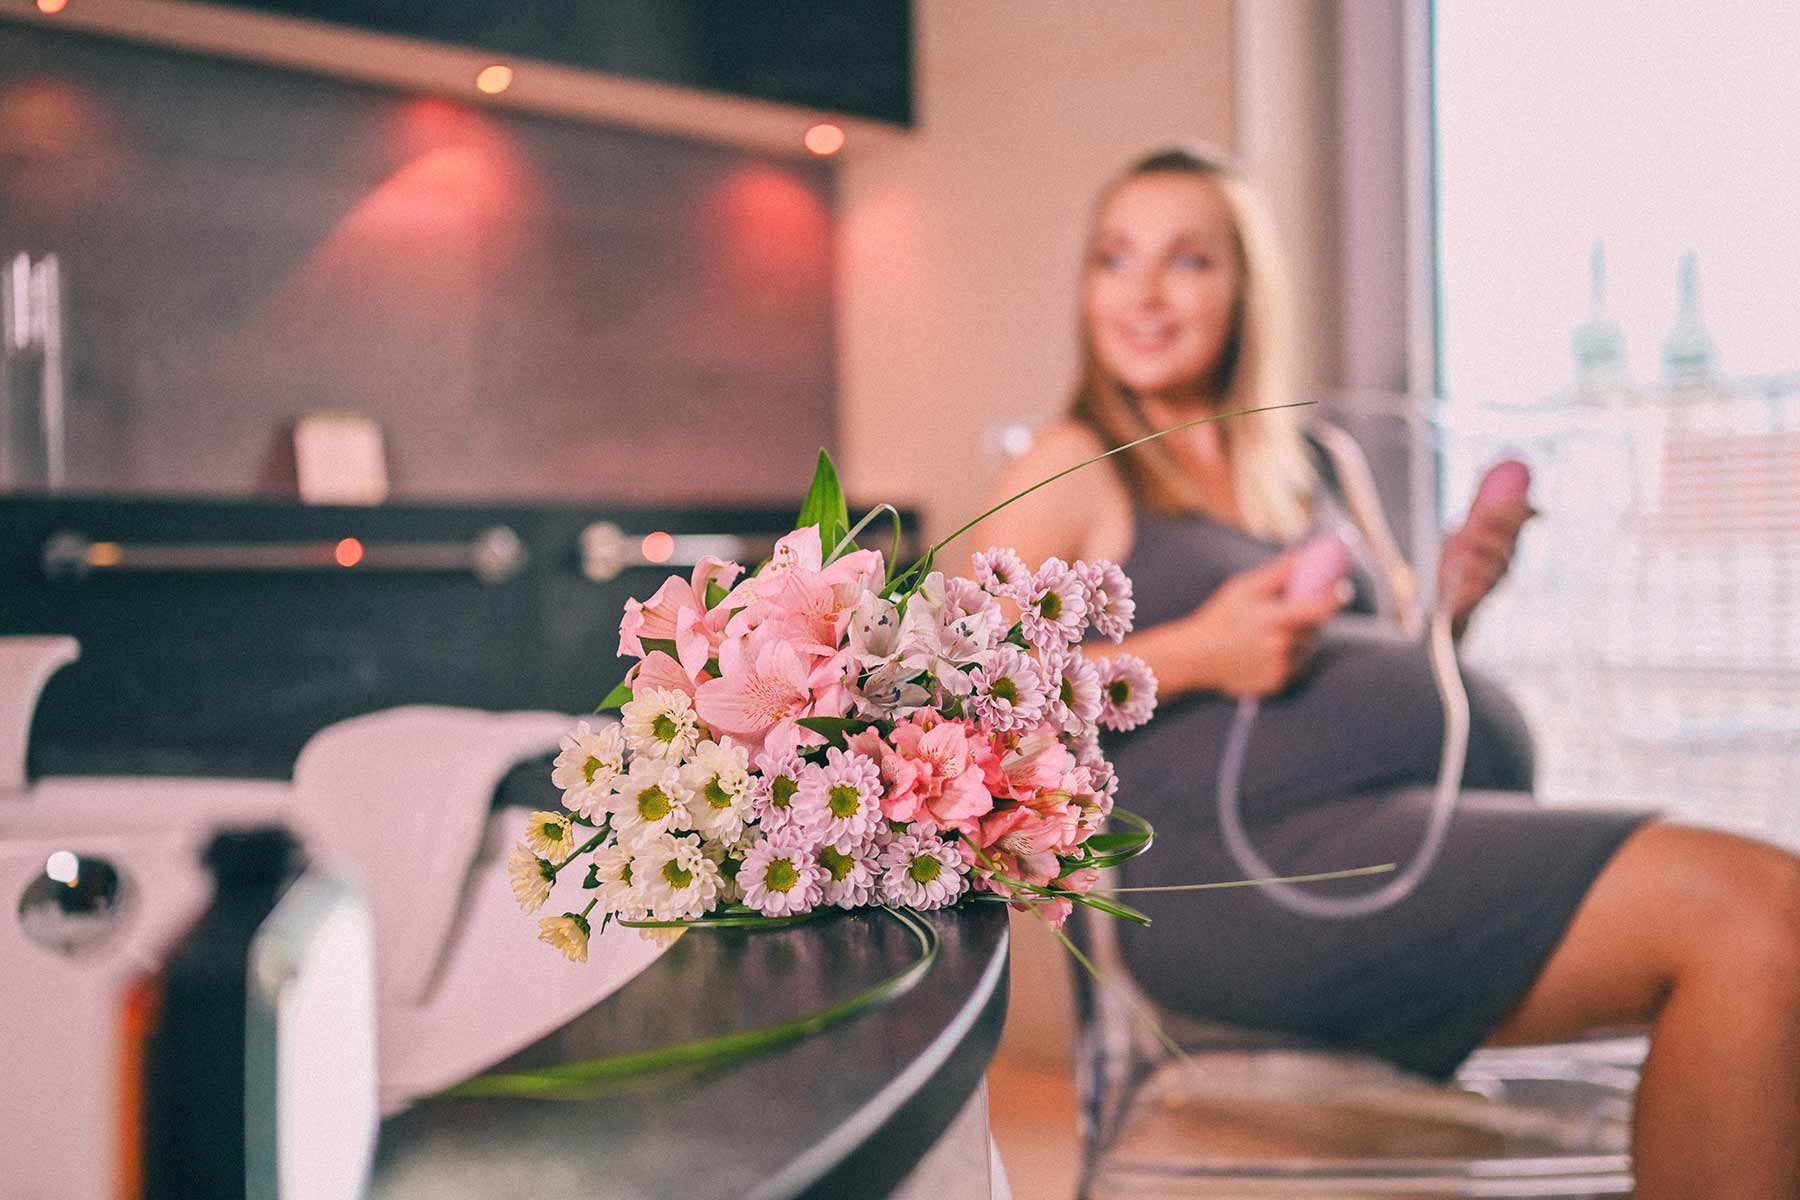 Pregnant Woman with Flowers Sitting Holding Aniball